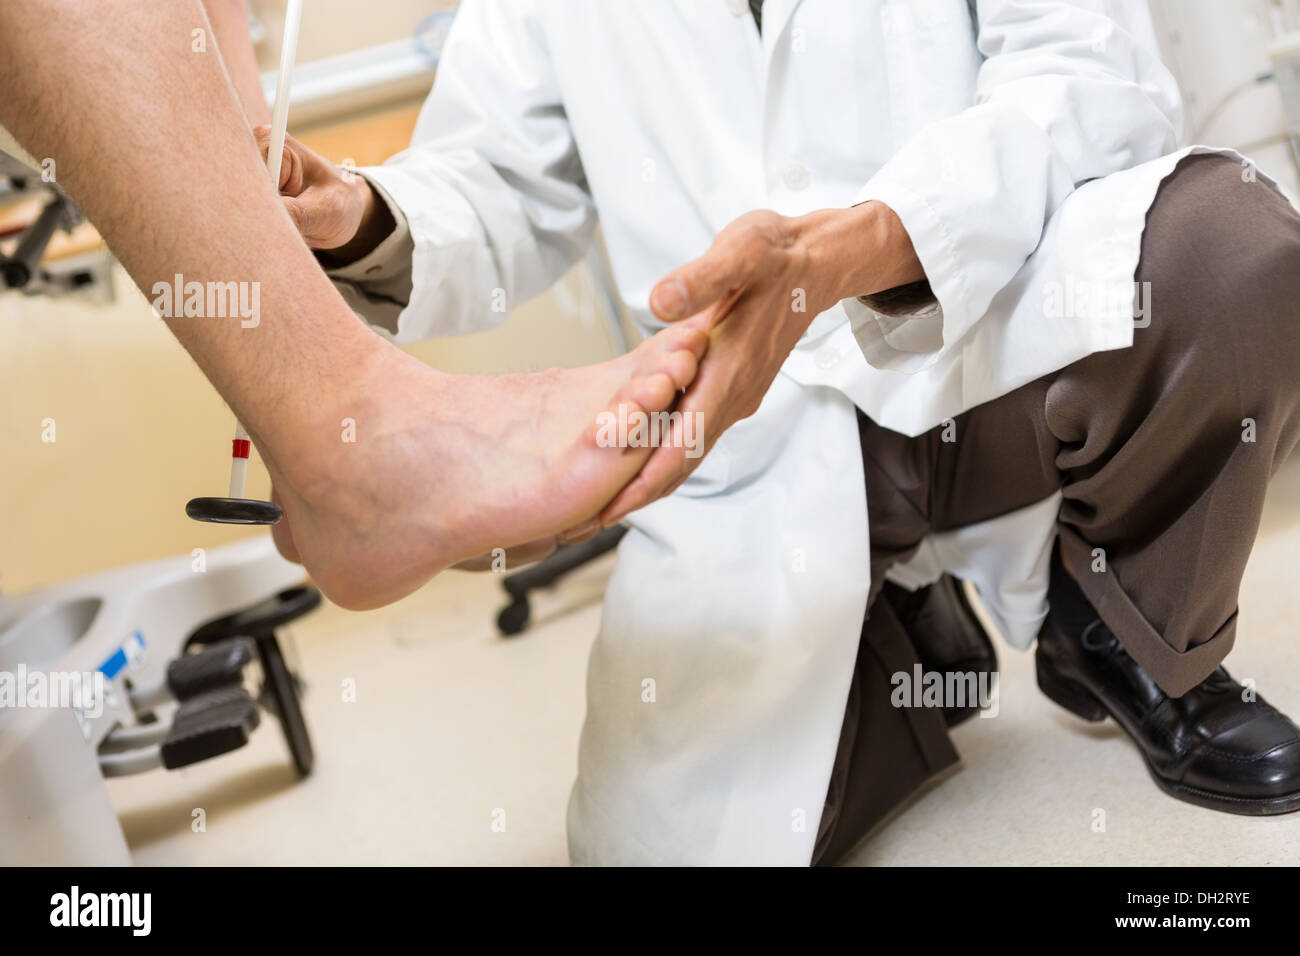 Doctor Examining Patient's Foot In Hospital Stock Photo